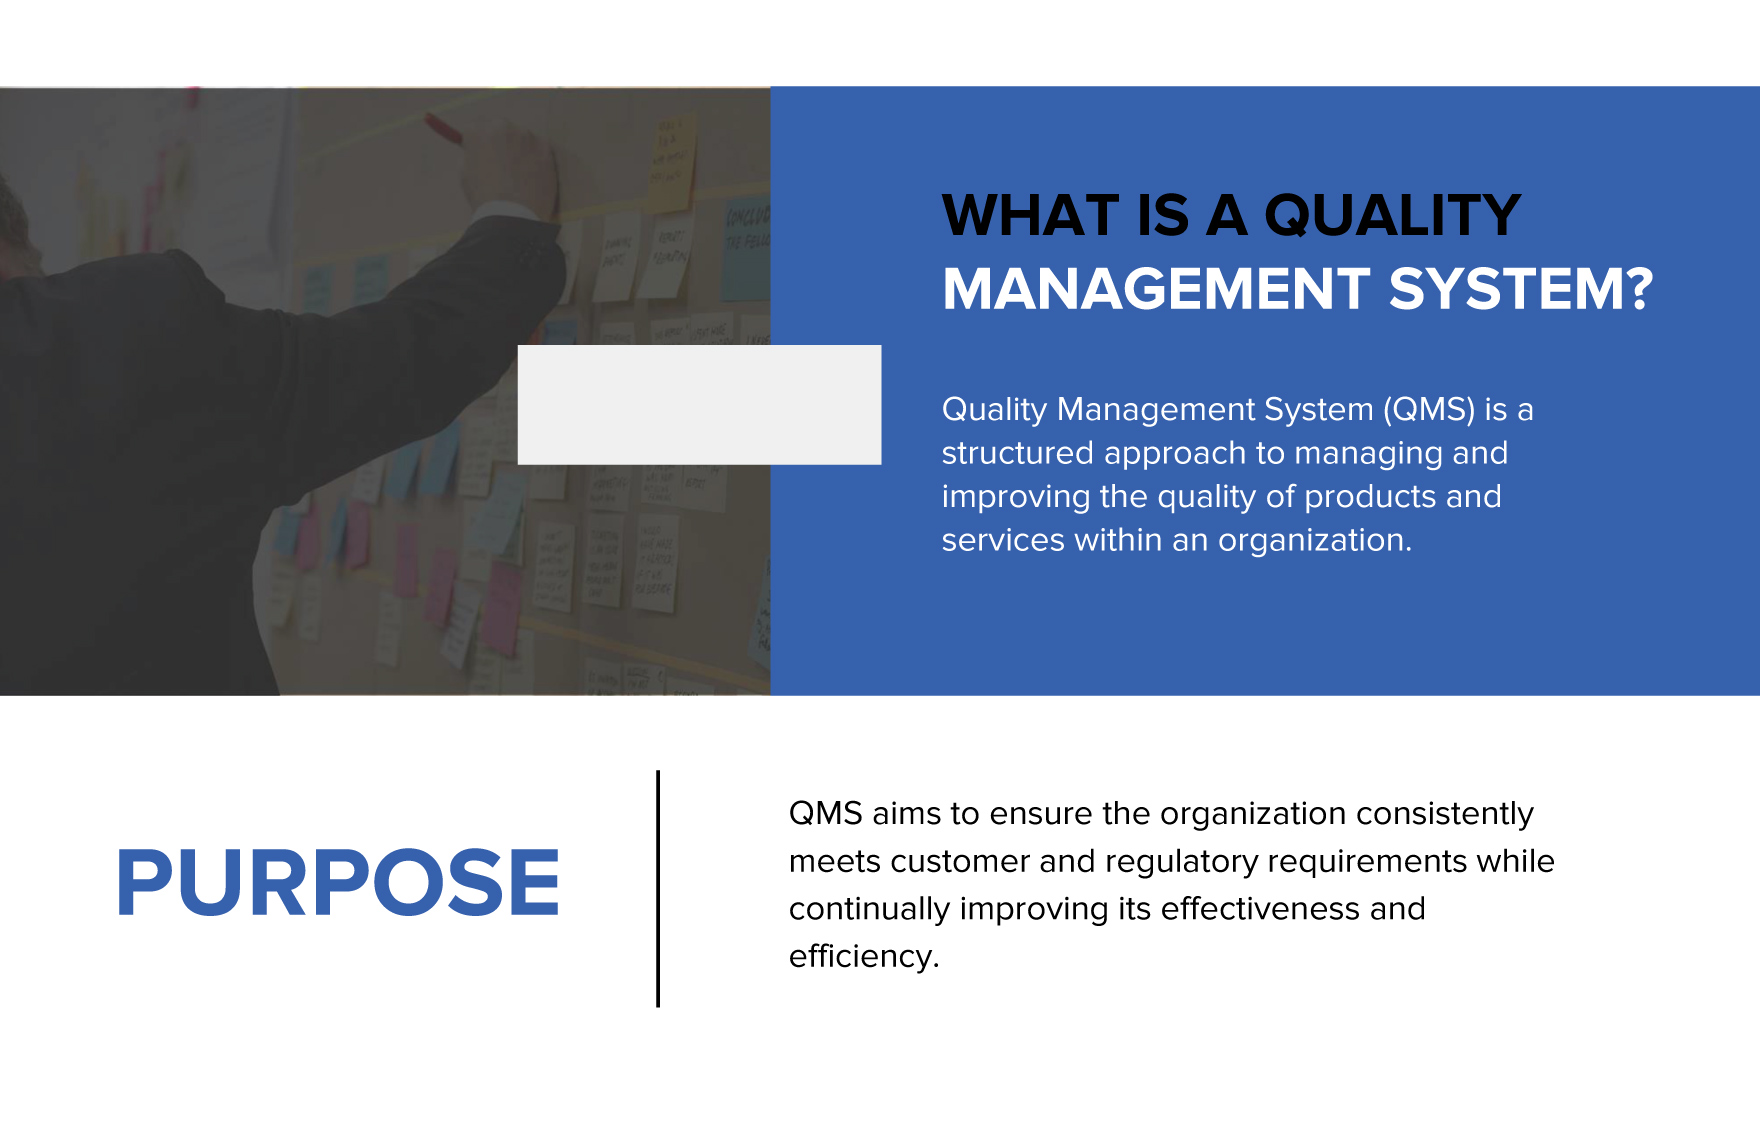 Quality Management System Overview Presentation Template